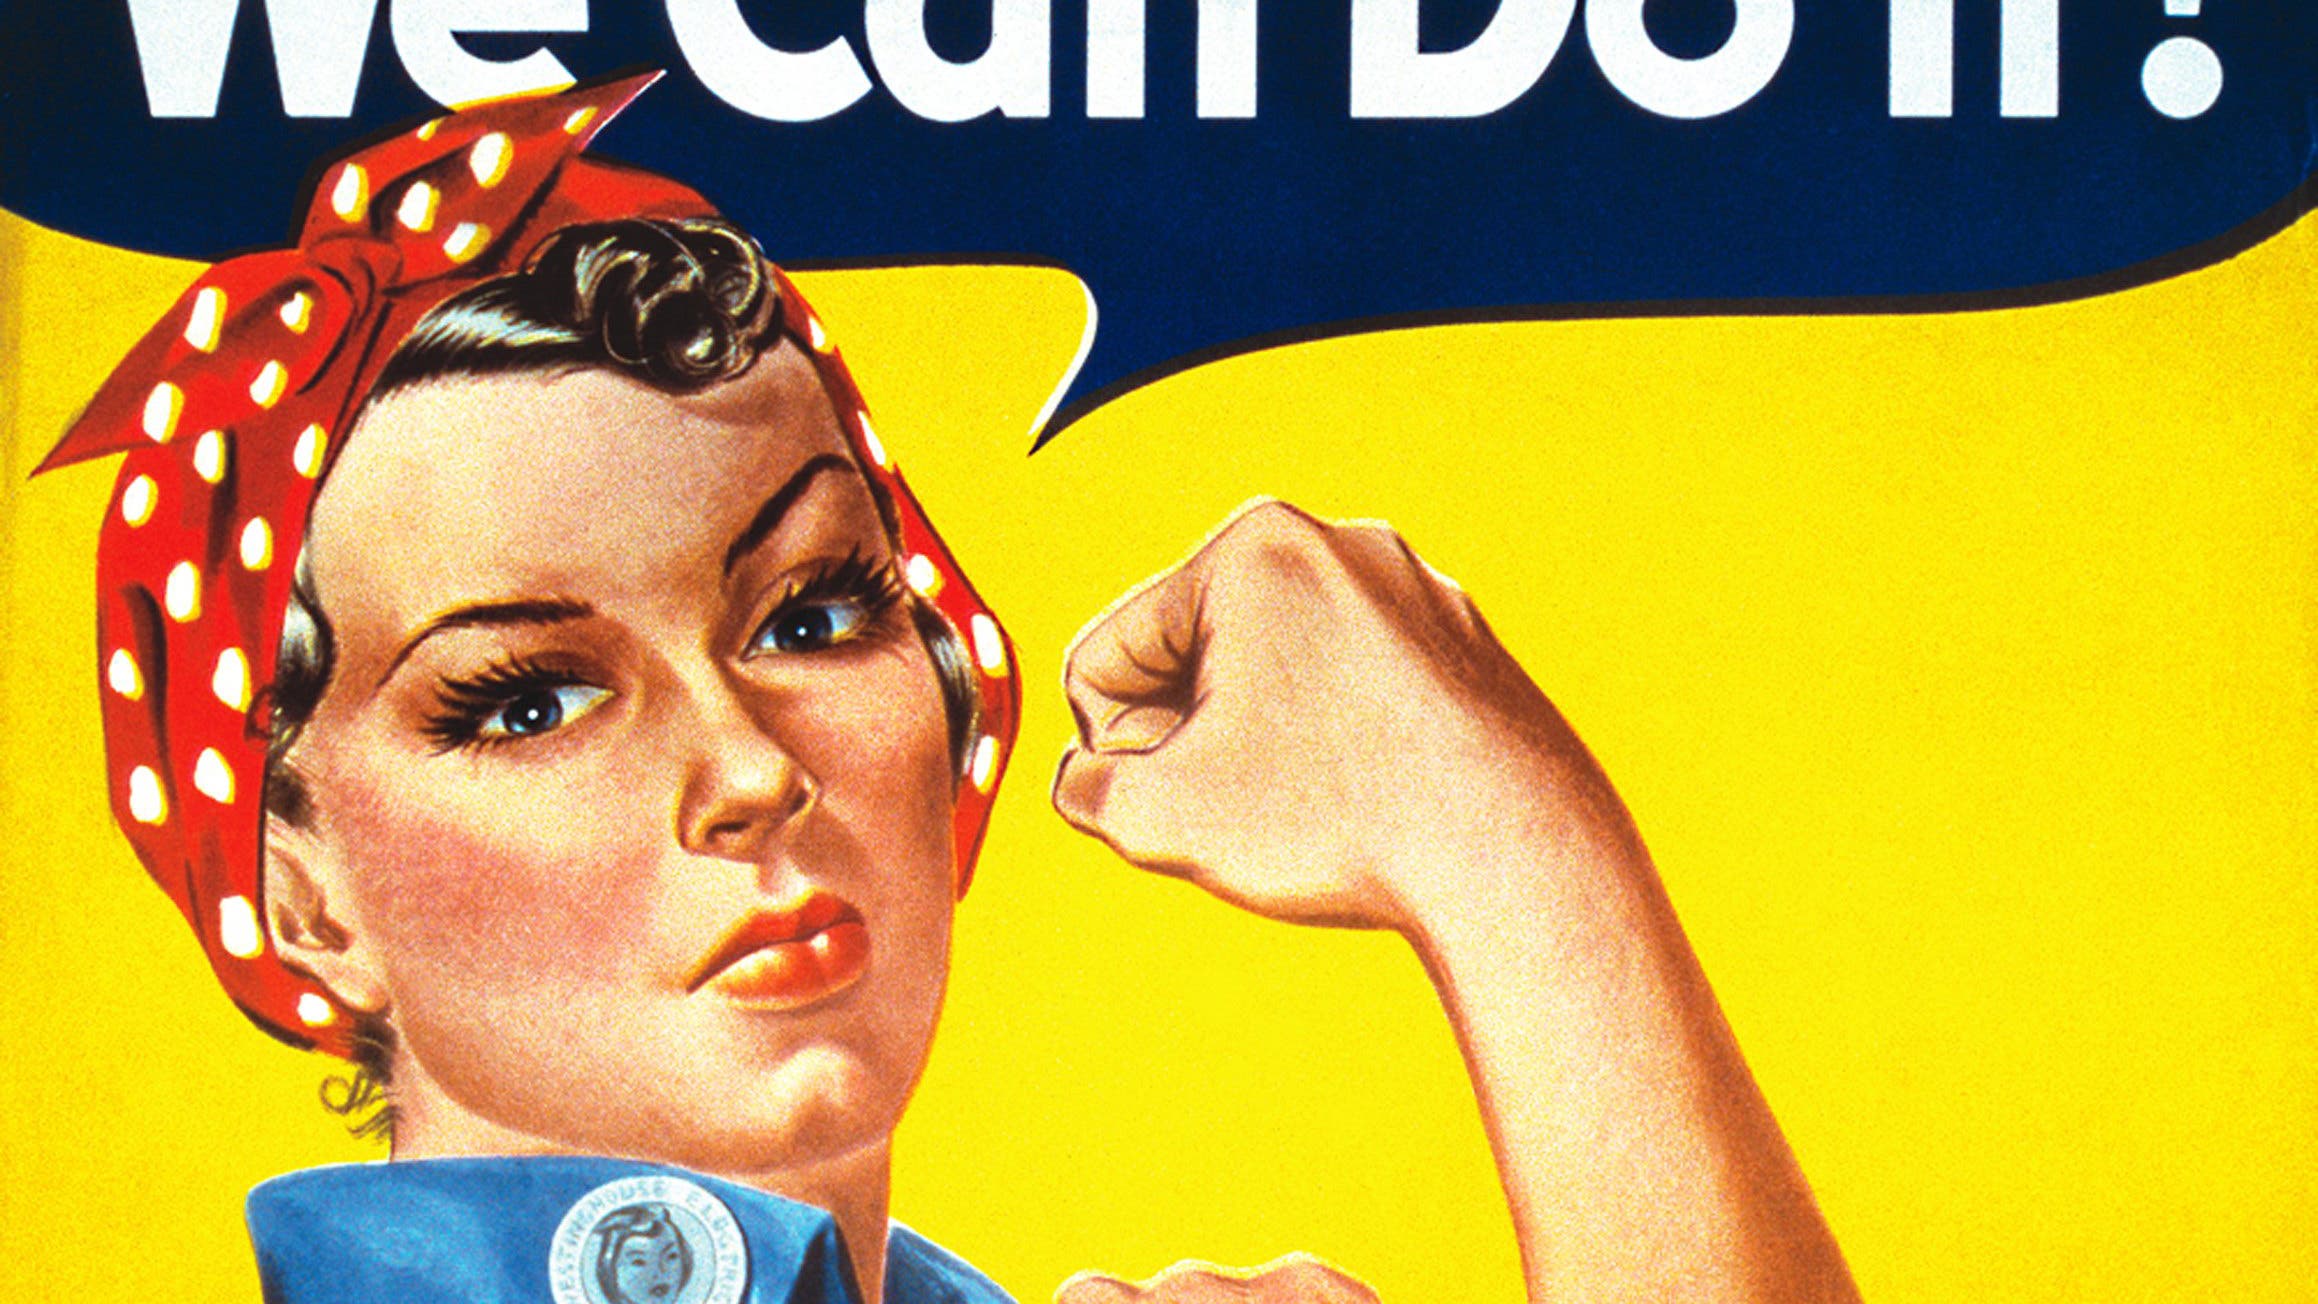 "We Can Do It!" Rosie the Riveter PosterA World War II color poster depicting 'Rosie the Riveter' encourages American women to show their strength and go to work for the war effort by J. Howard Miller in circa 1940. (Photo courtesy National Archives/Getty Images)